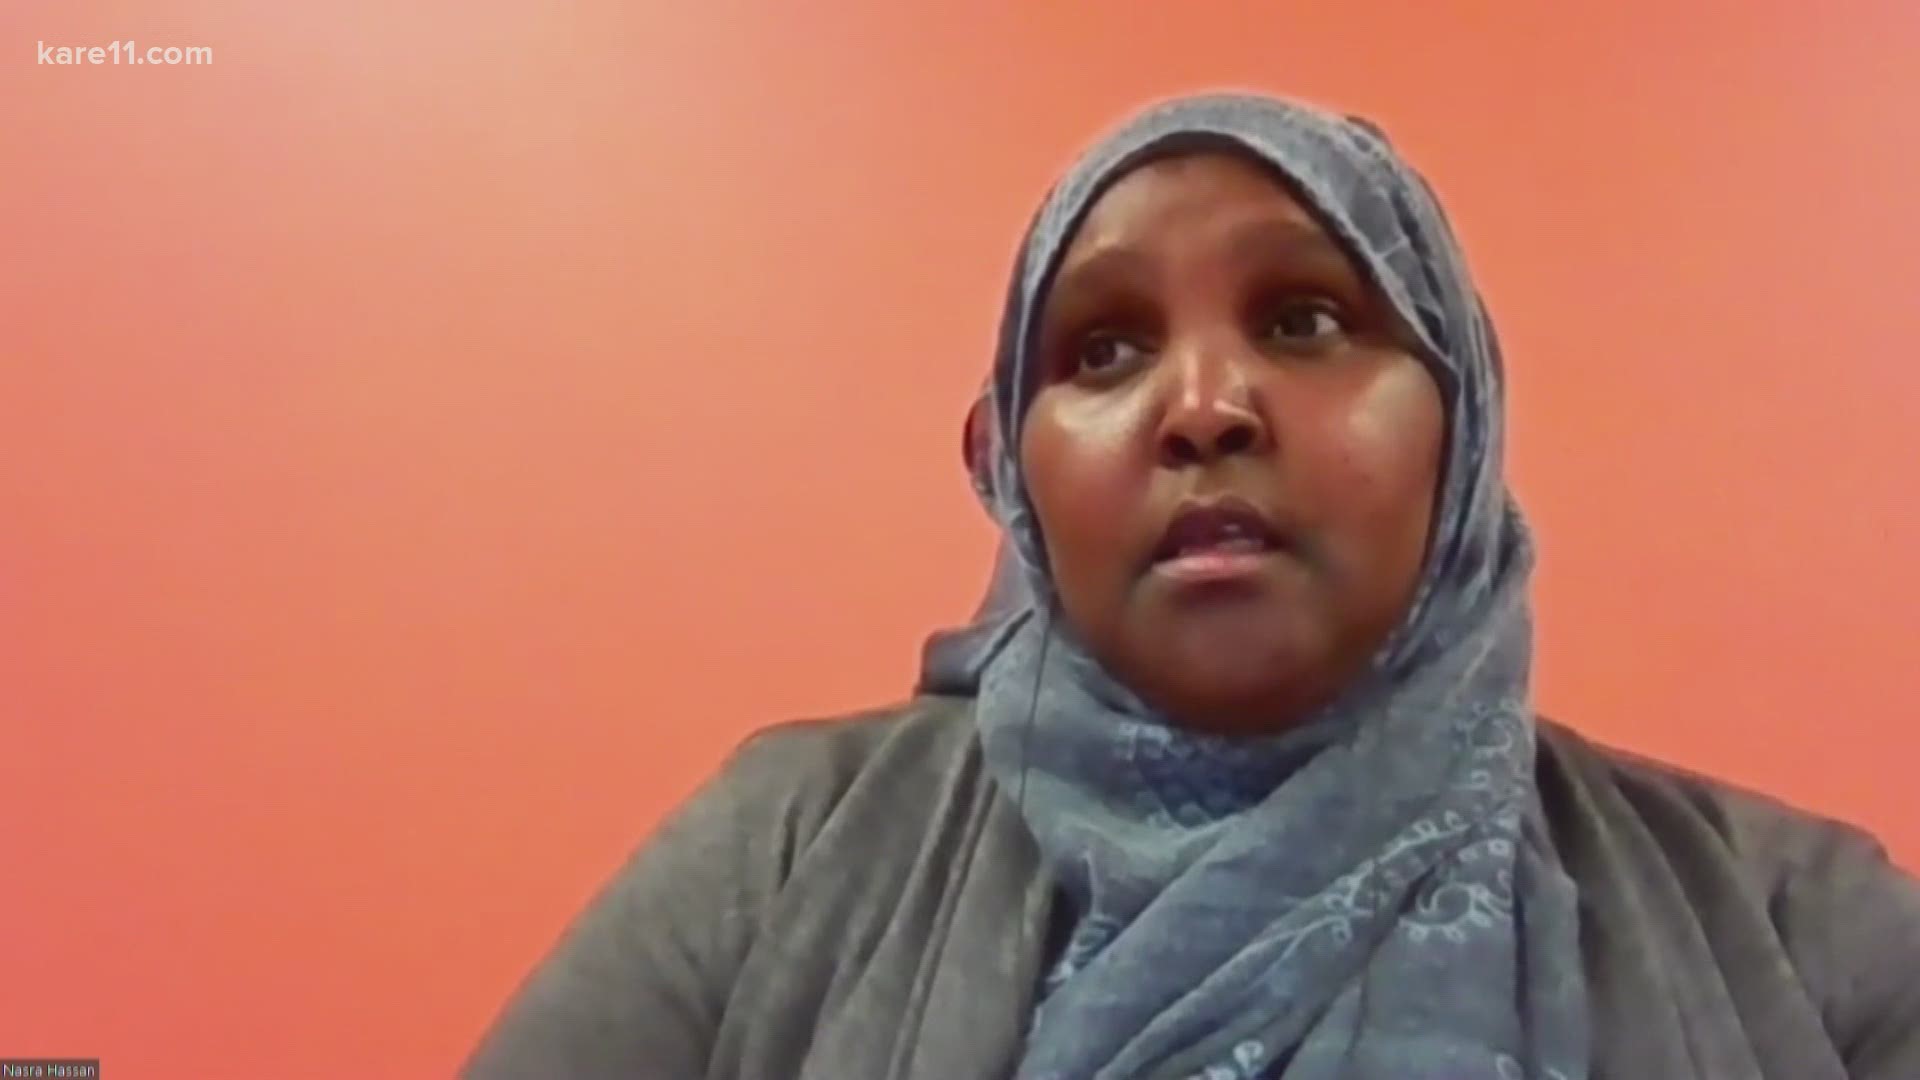 WellShare International’s Parent Educators are assisting Somali families in the Twin Cities to help build strong parent-child relationships.